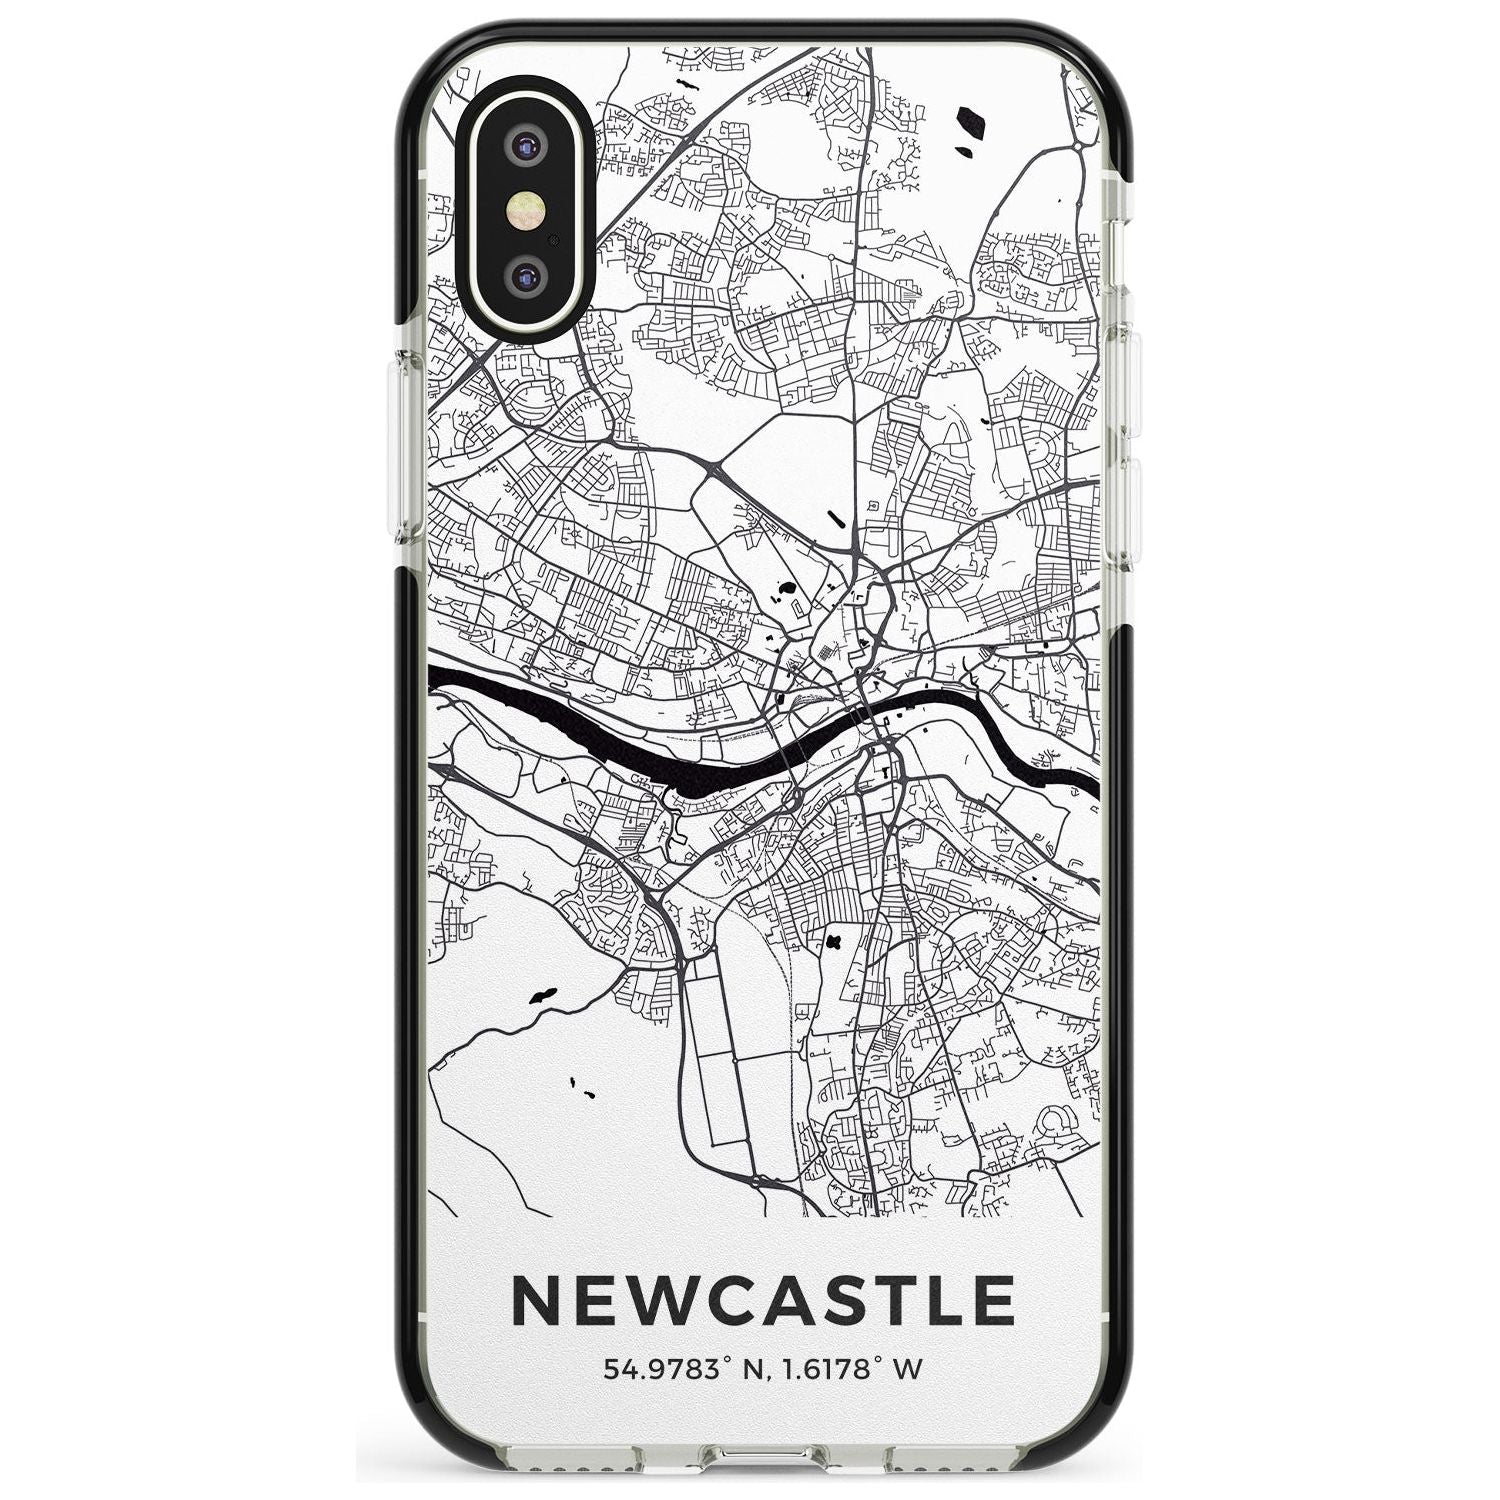 Map of Newcastle, England Black Impact Phone Case for iPhone X XS Max XR